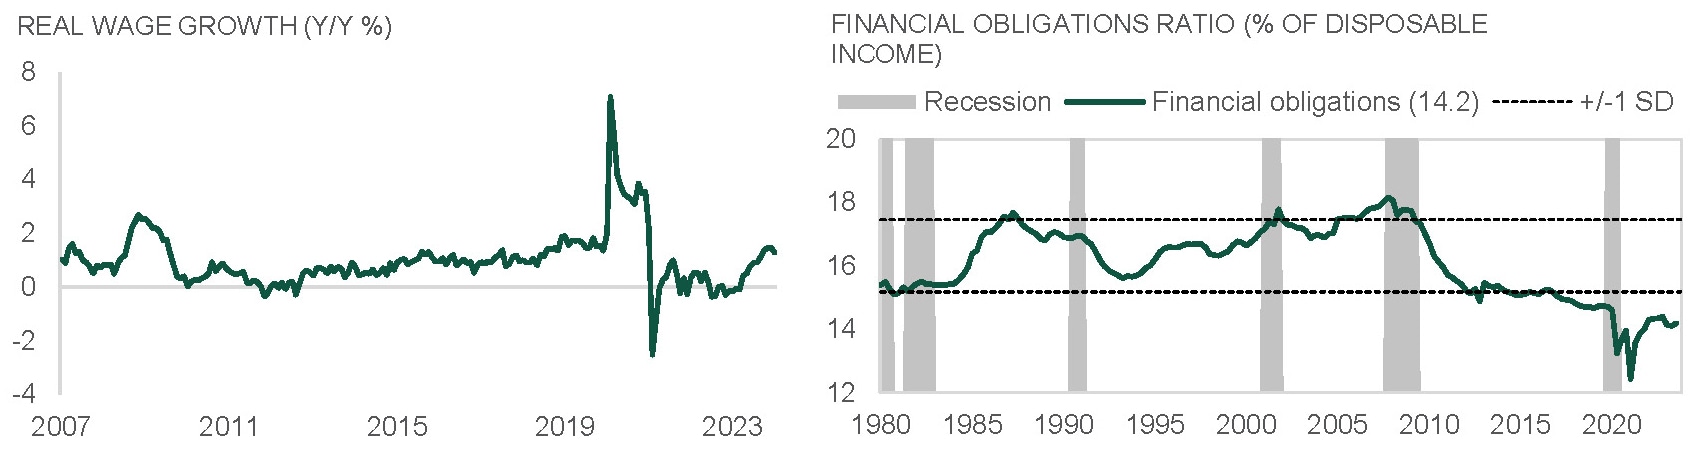 real wage growth % and financial obligations ratio